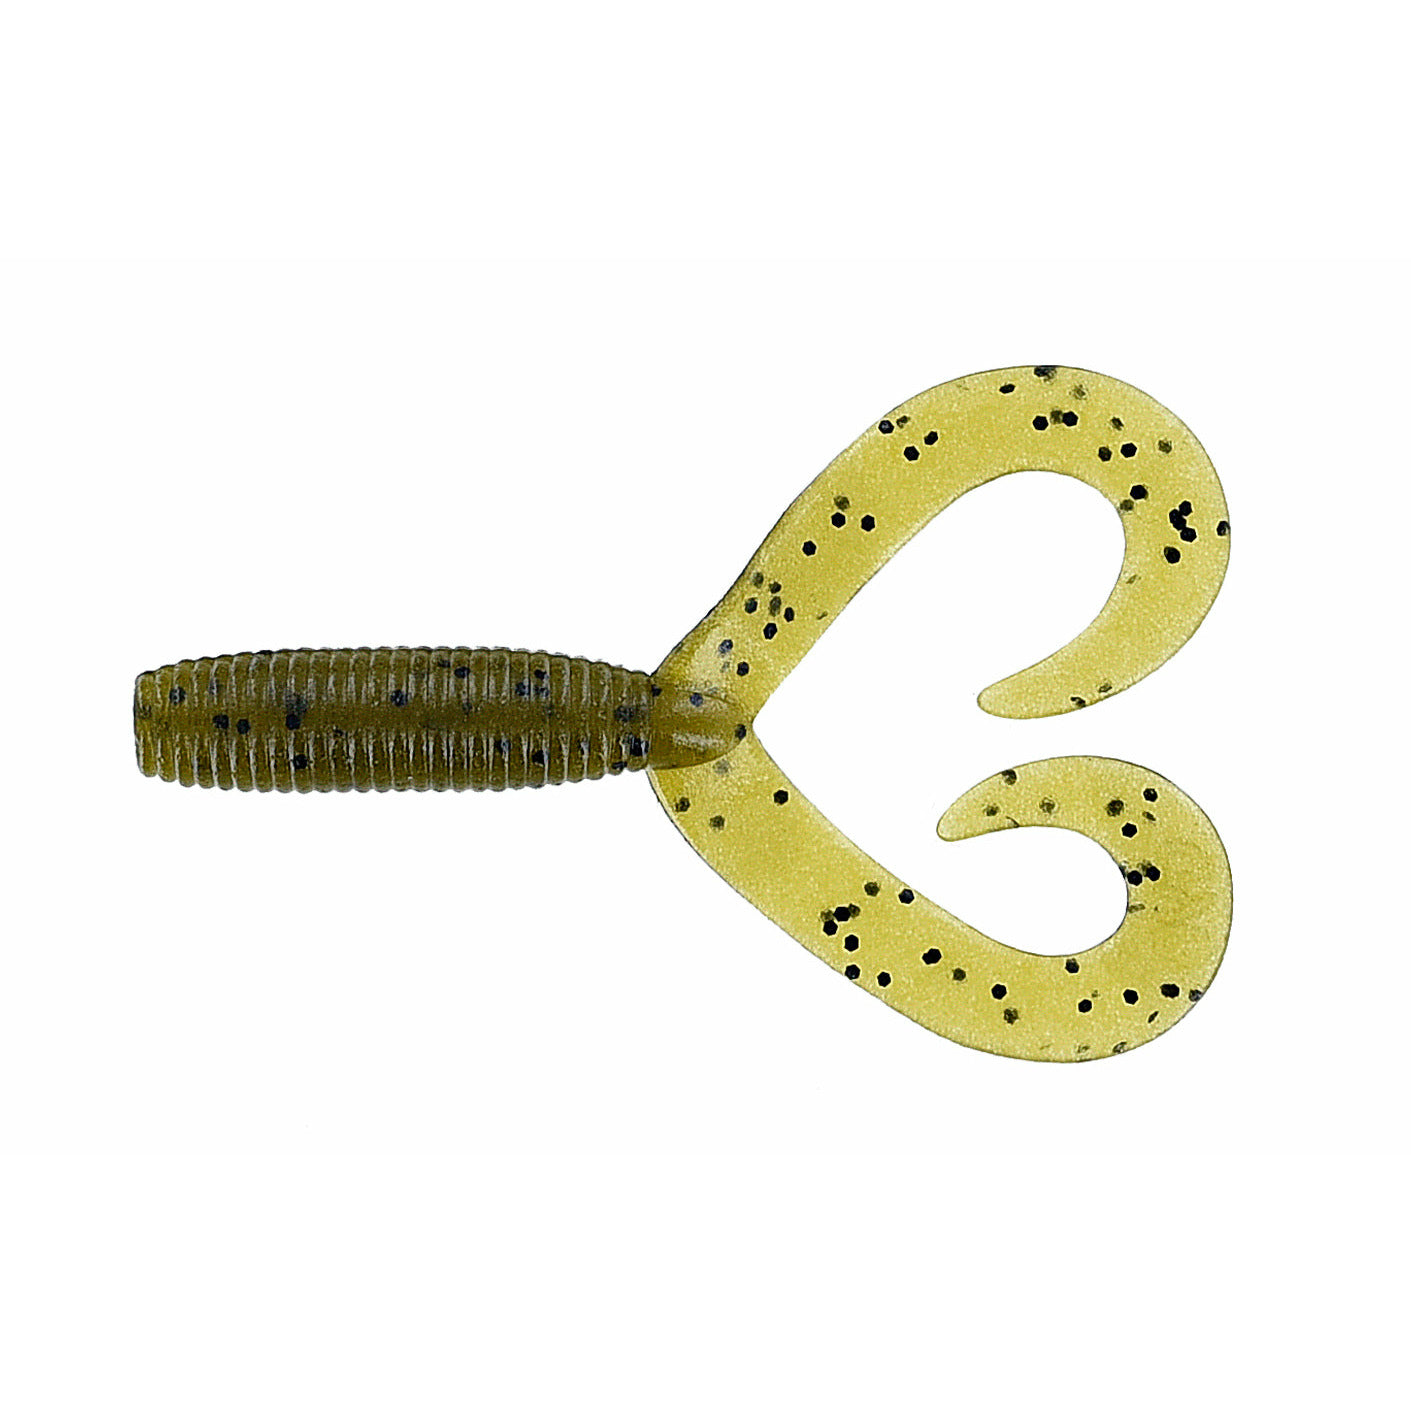 YAMAMOTO DOUBLE TAIL GRUB - Copperstate Tackle